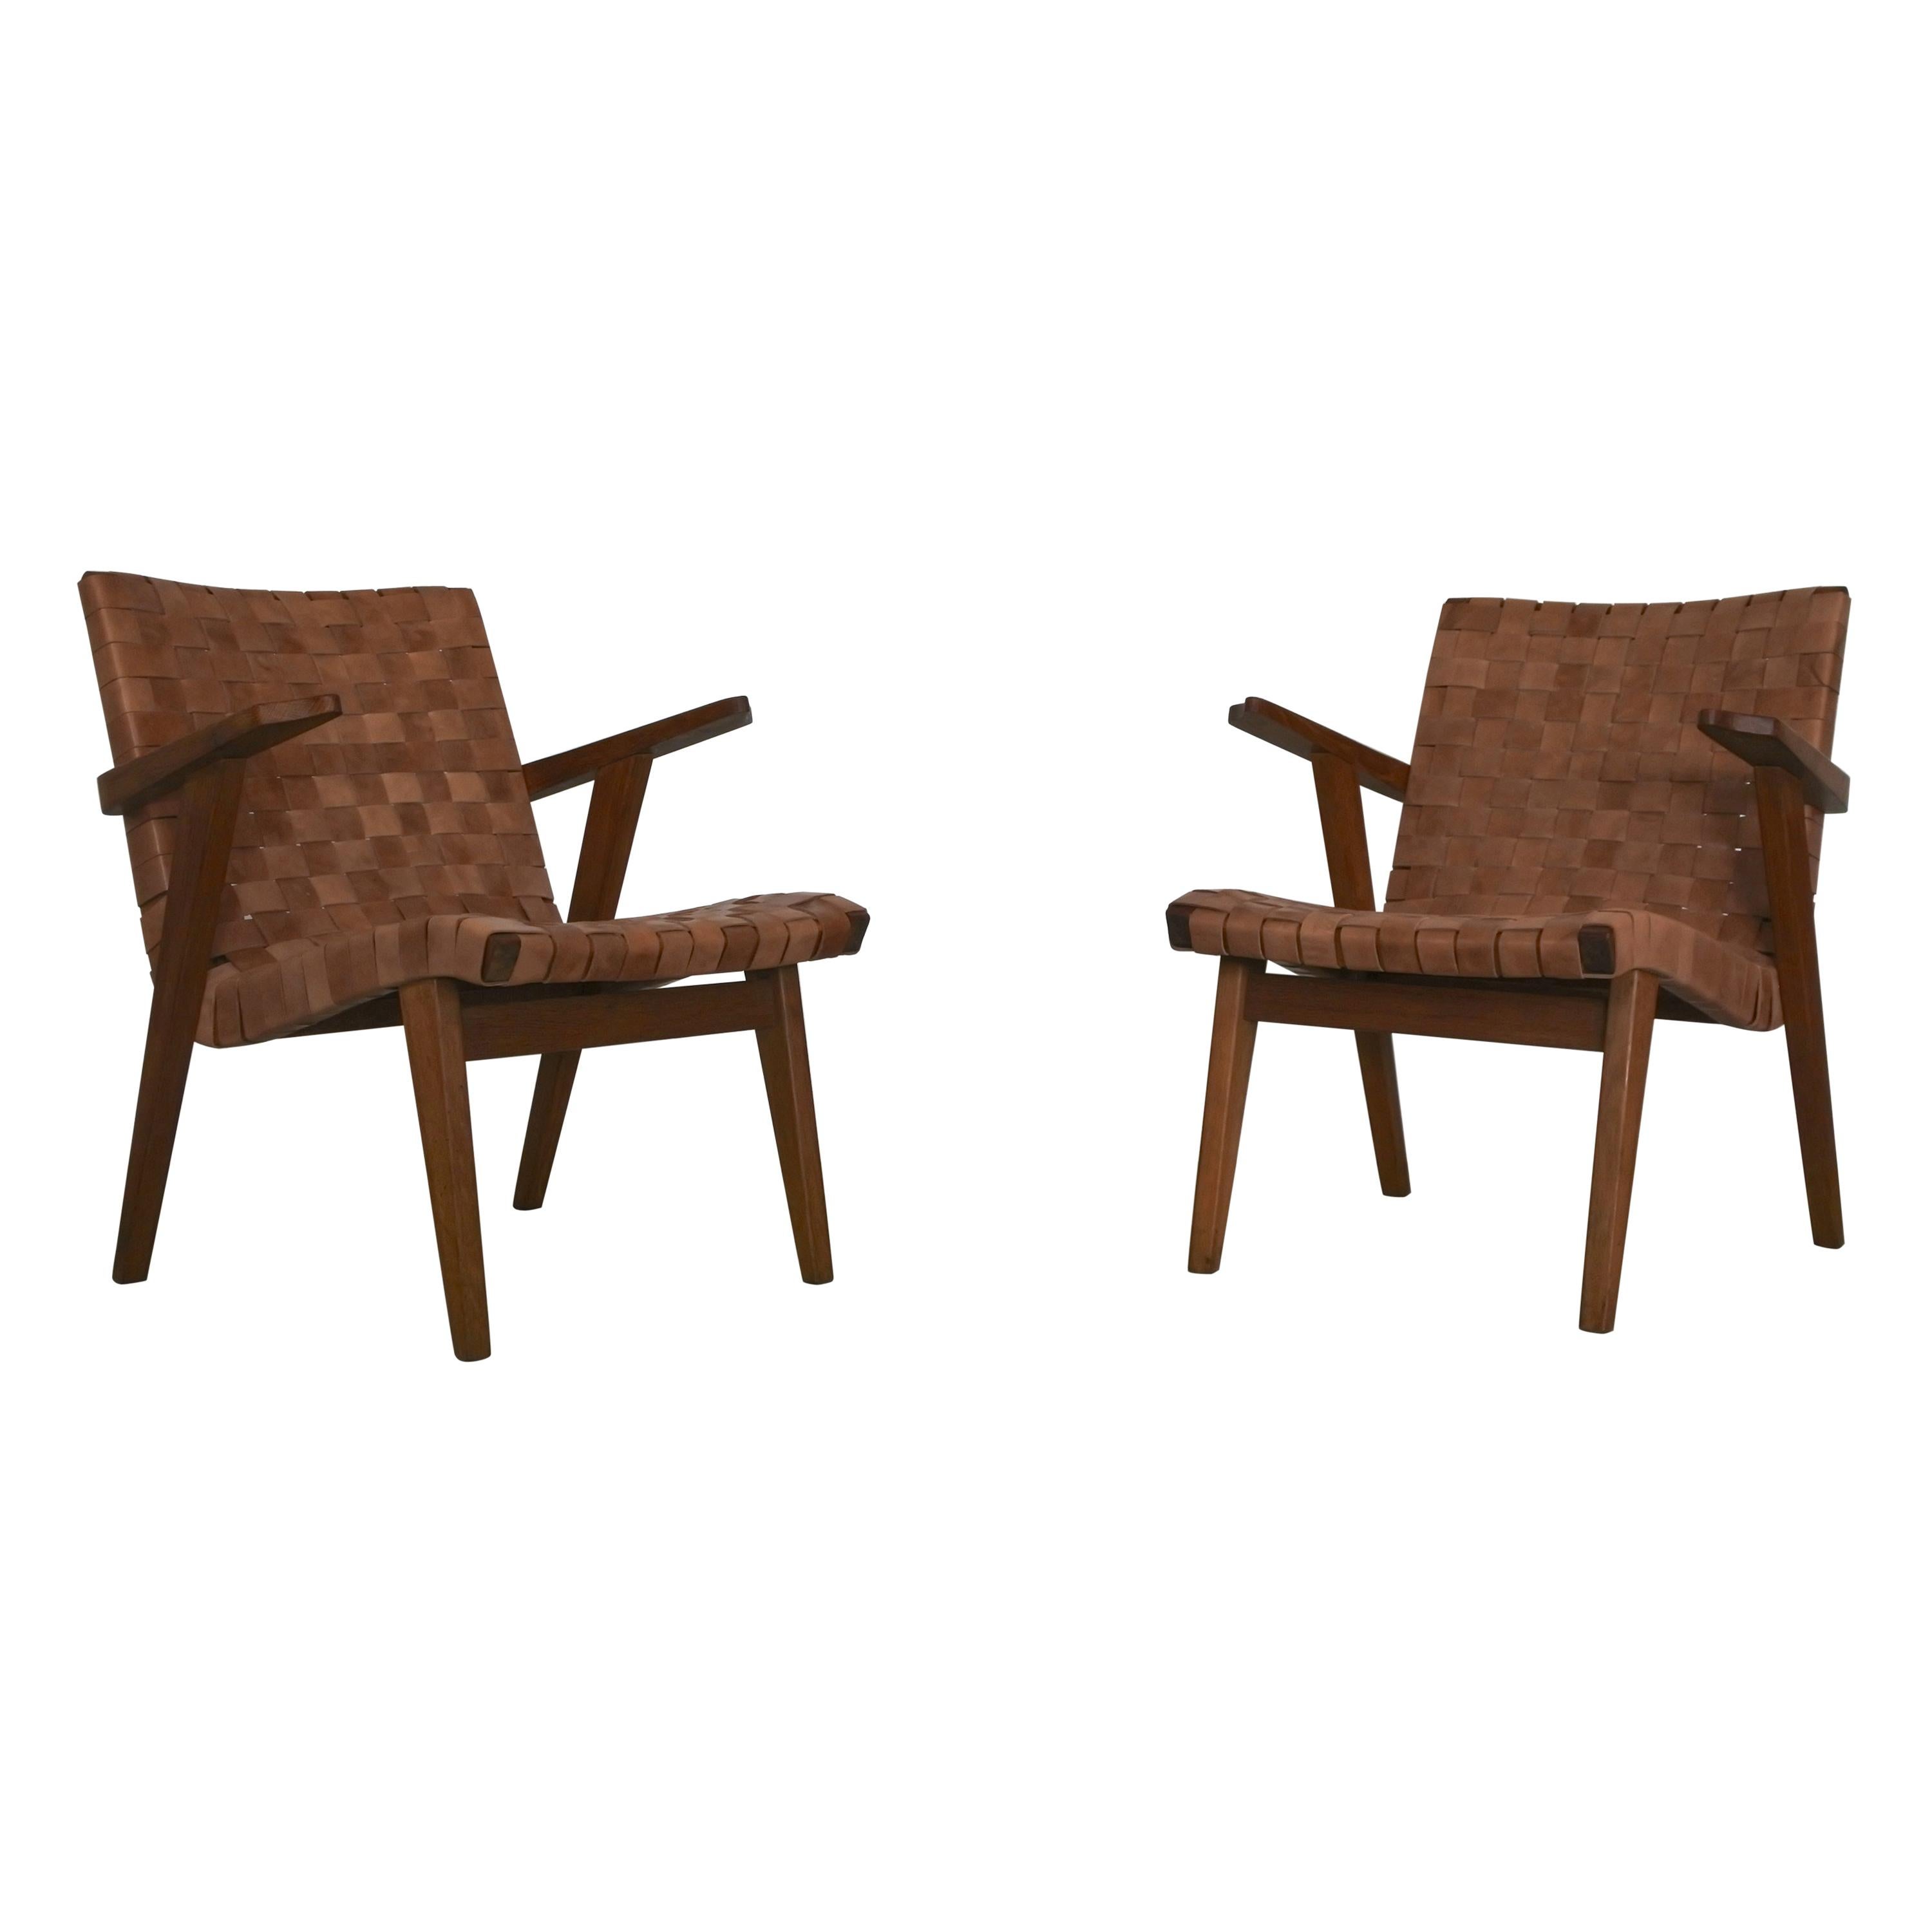 Set of Two Leather Webbed & Oak Lounge Chairs Attr. to Jens Risom & Knoll, 1950s